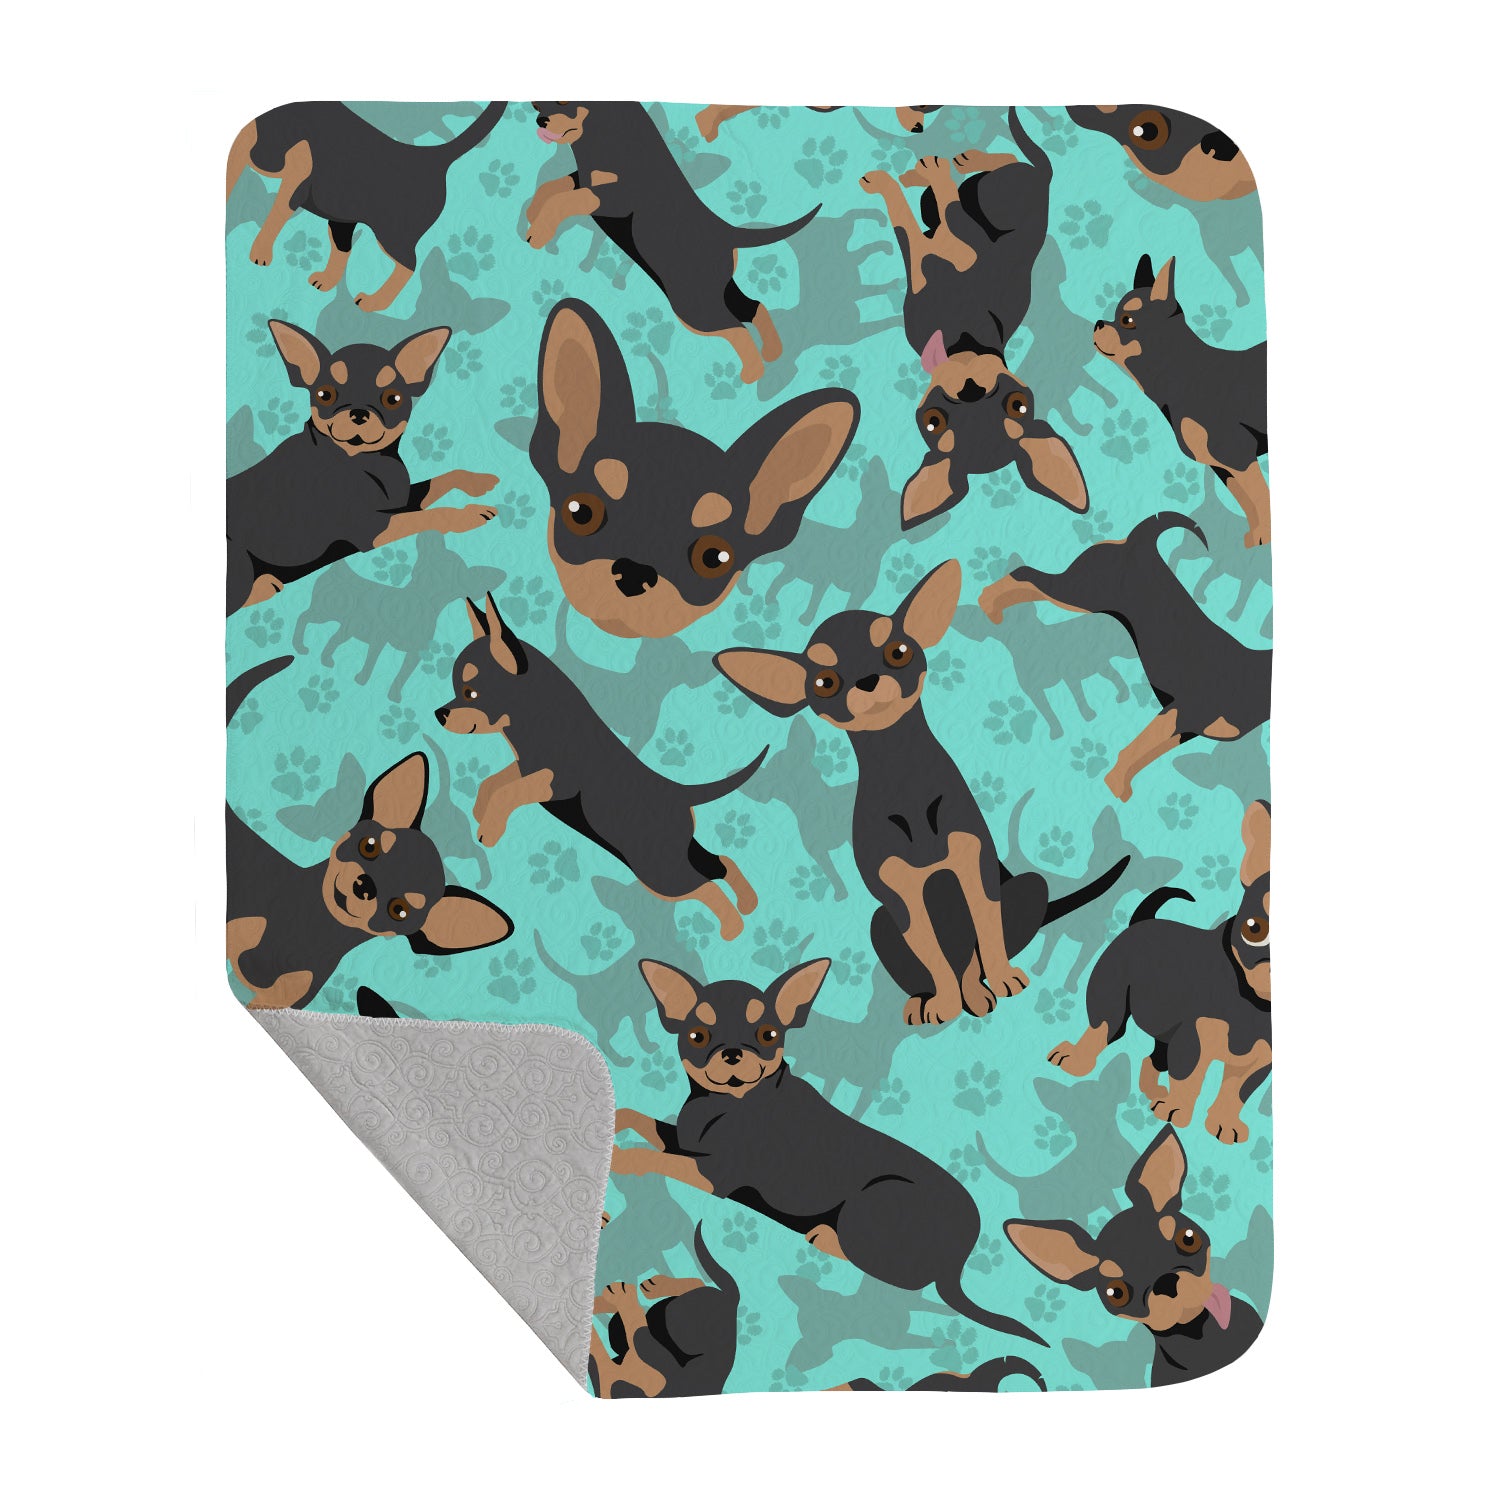 Buy this Black and Tan Chihuahua Quilted Blanket 50x60